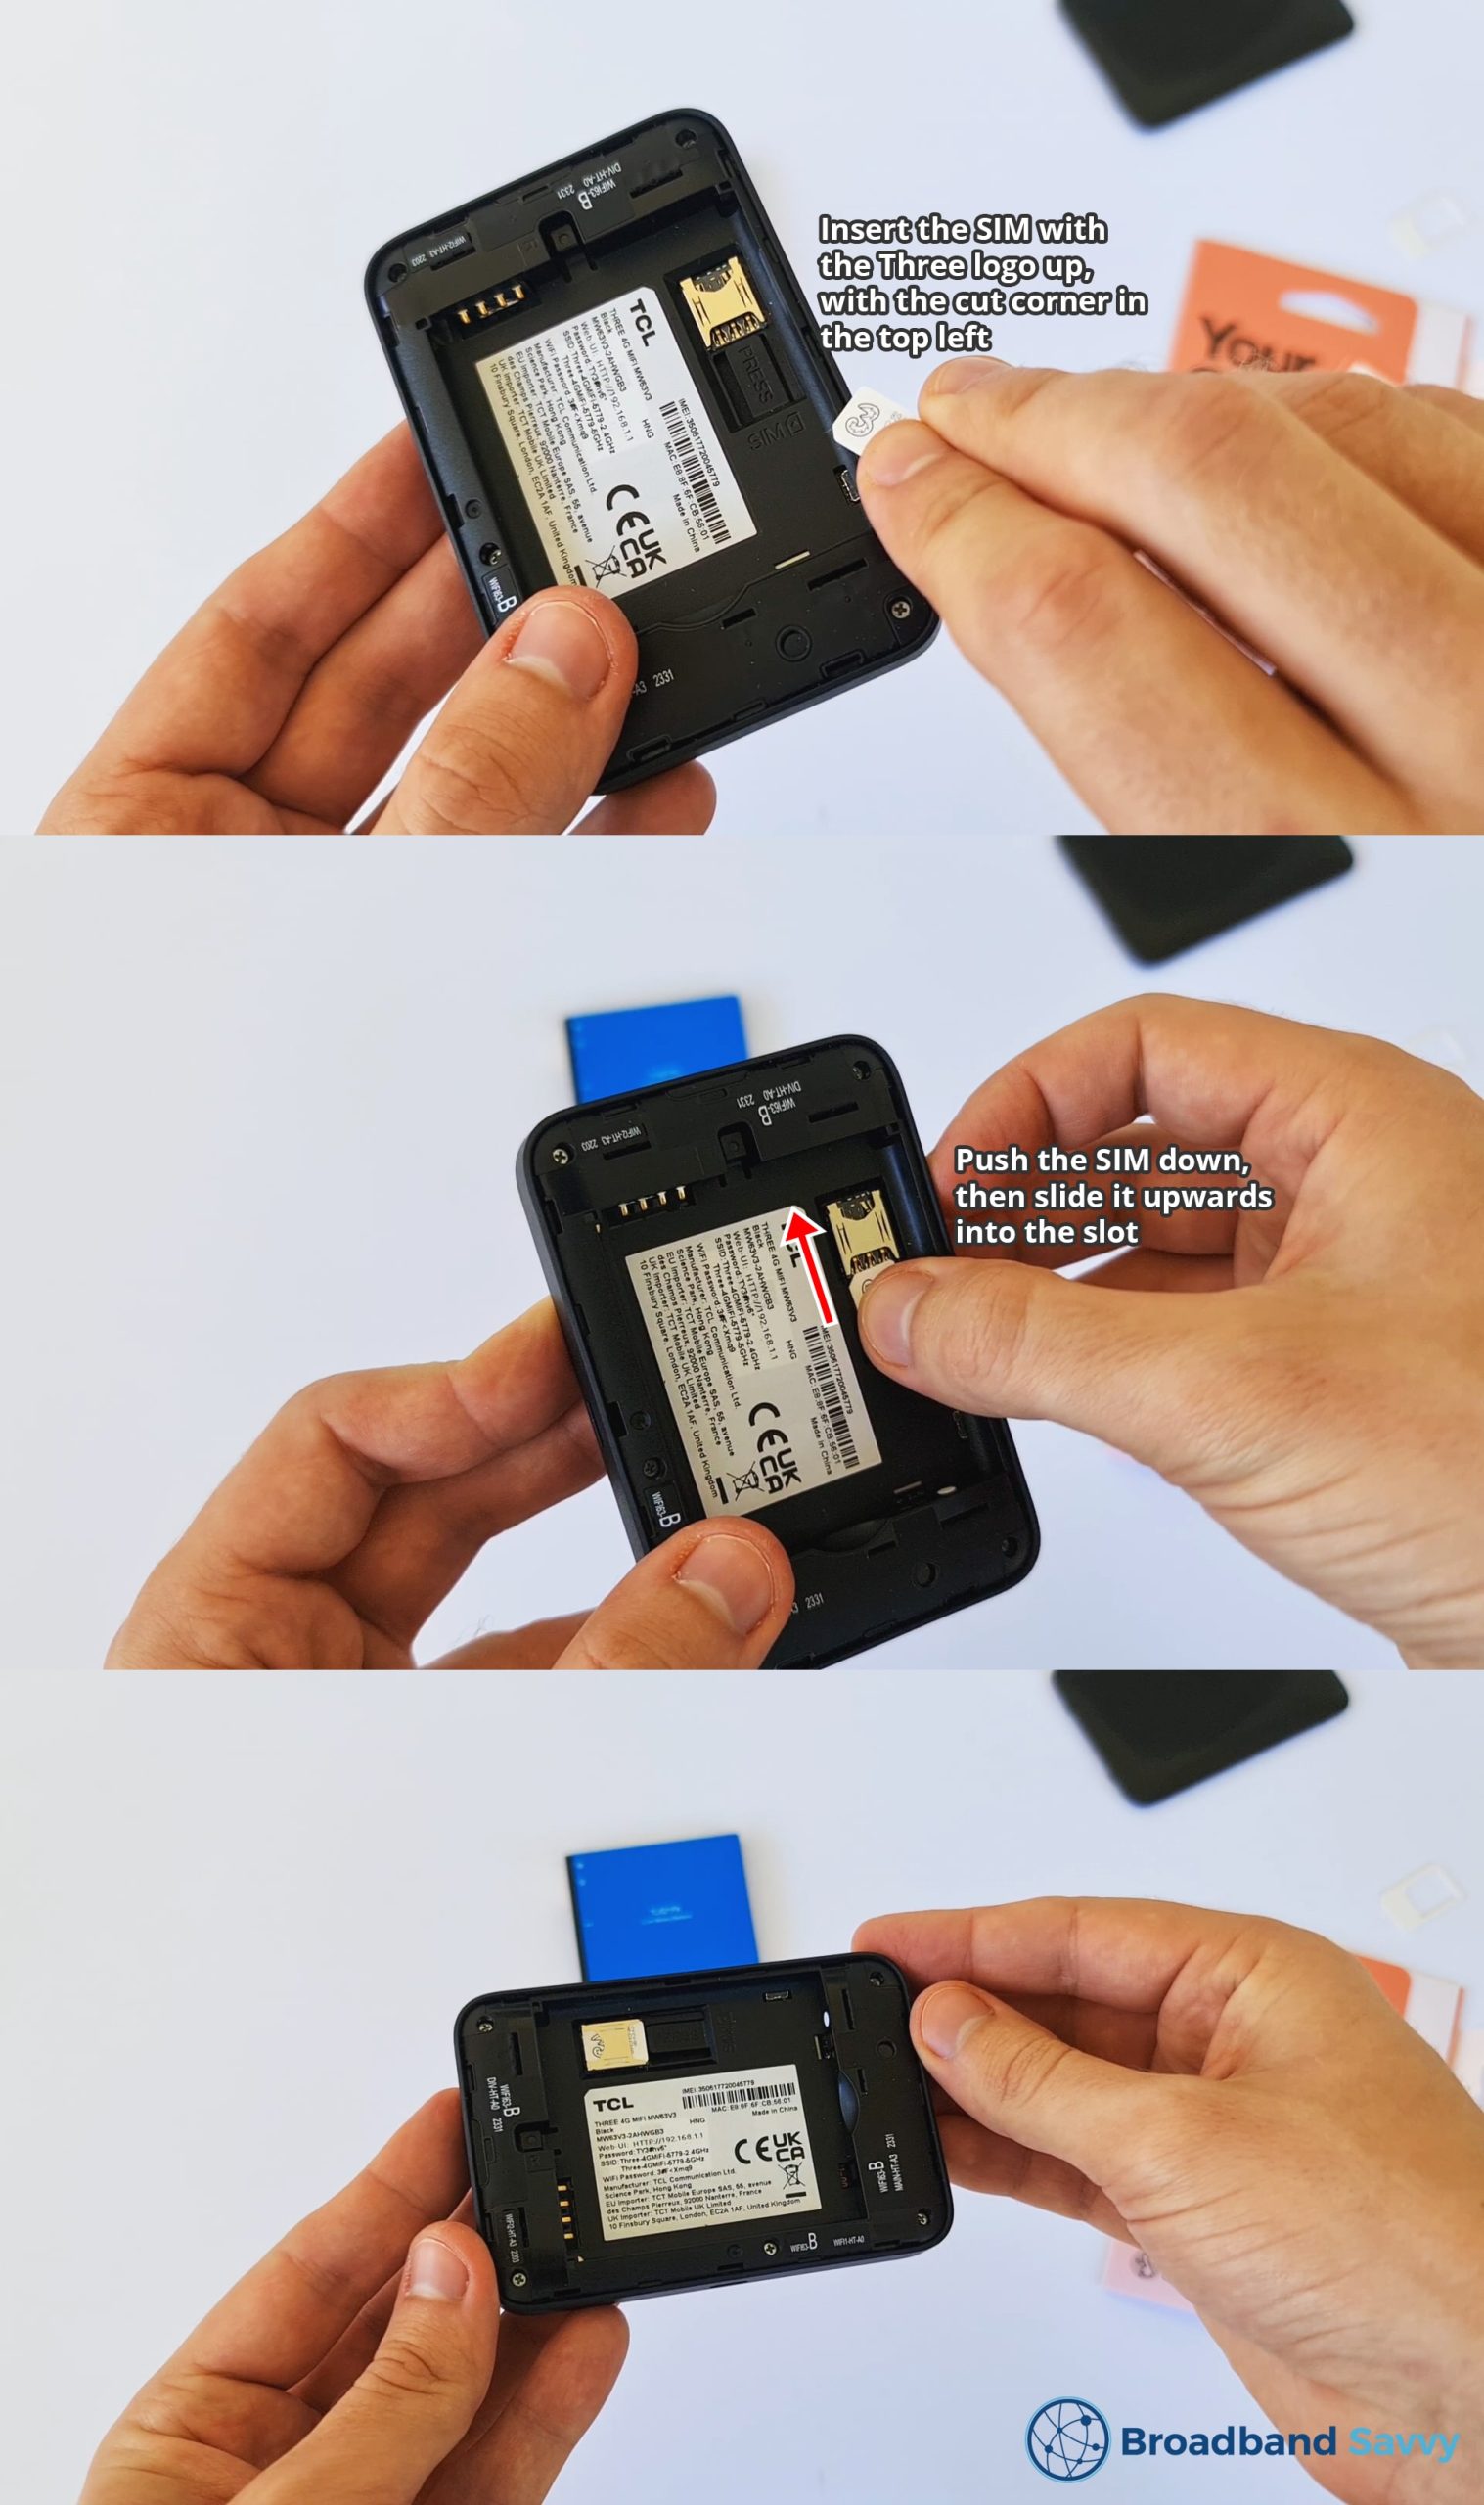 Inserting the SIM card into the TCL mobile Wi-Fi device.